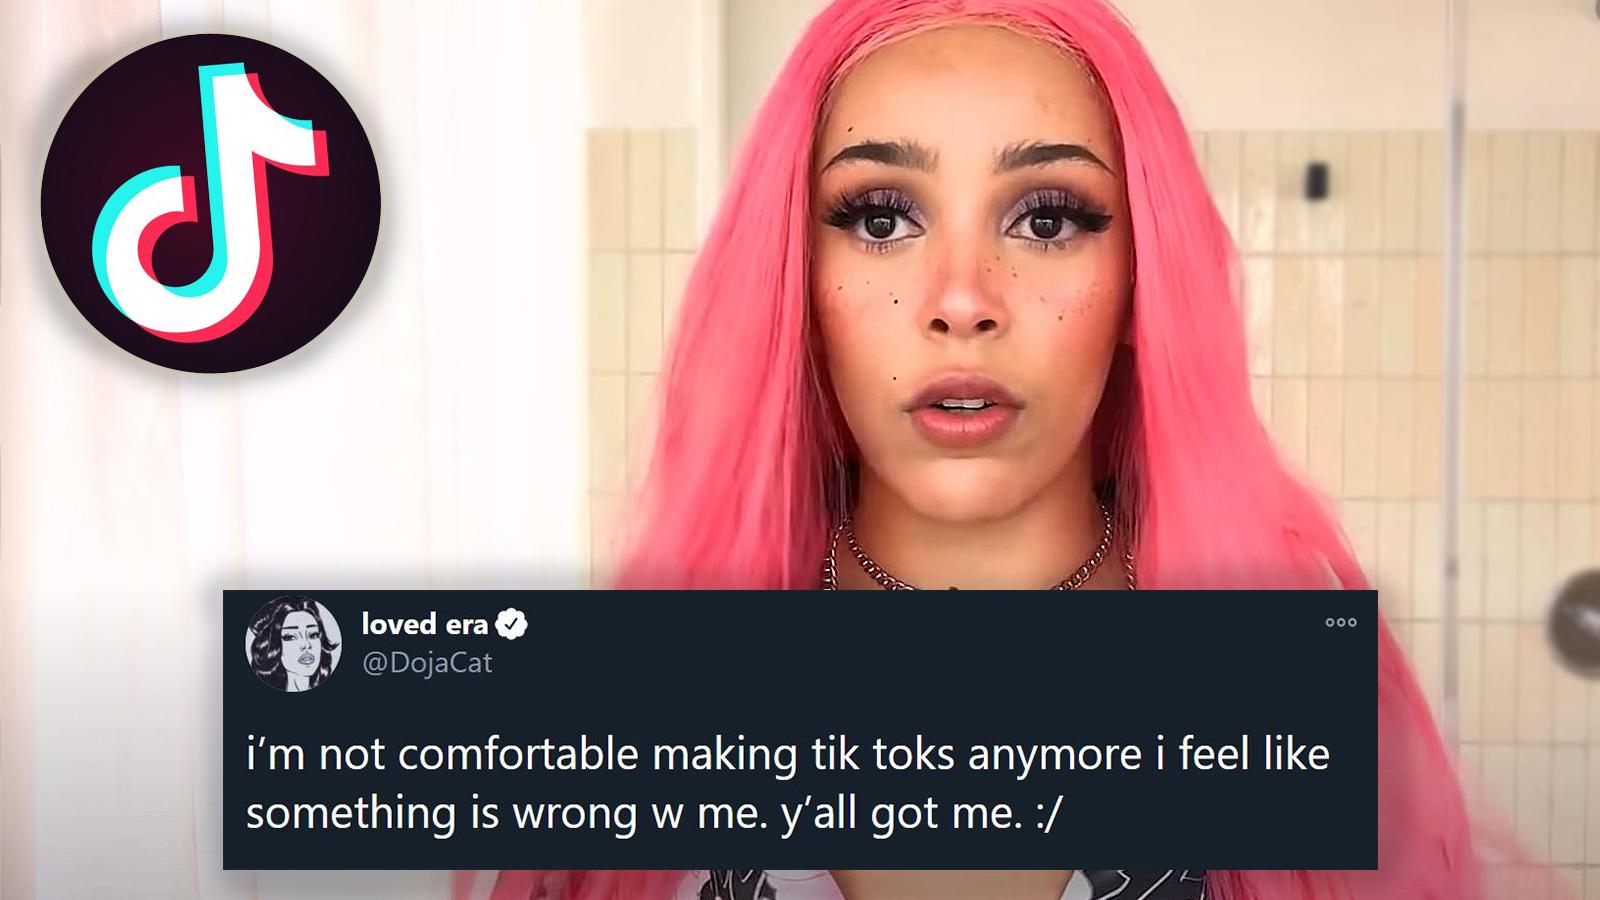 What is going on with Doja Cat's TikTok account? Rapper's videos disappear  - Dexerto